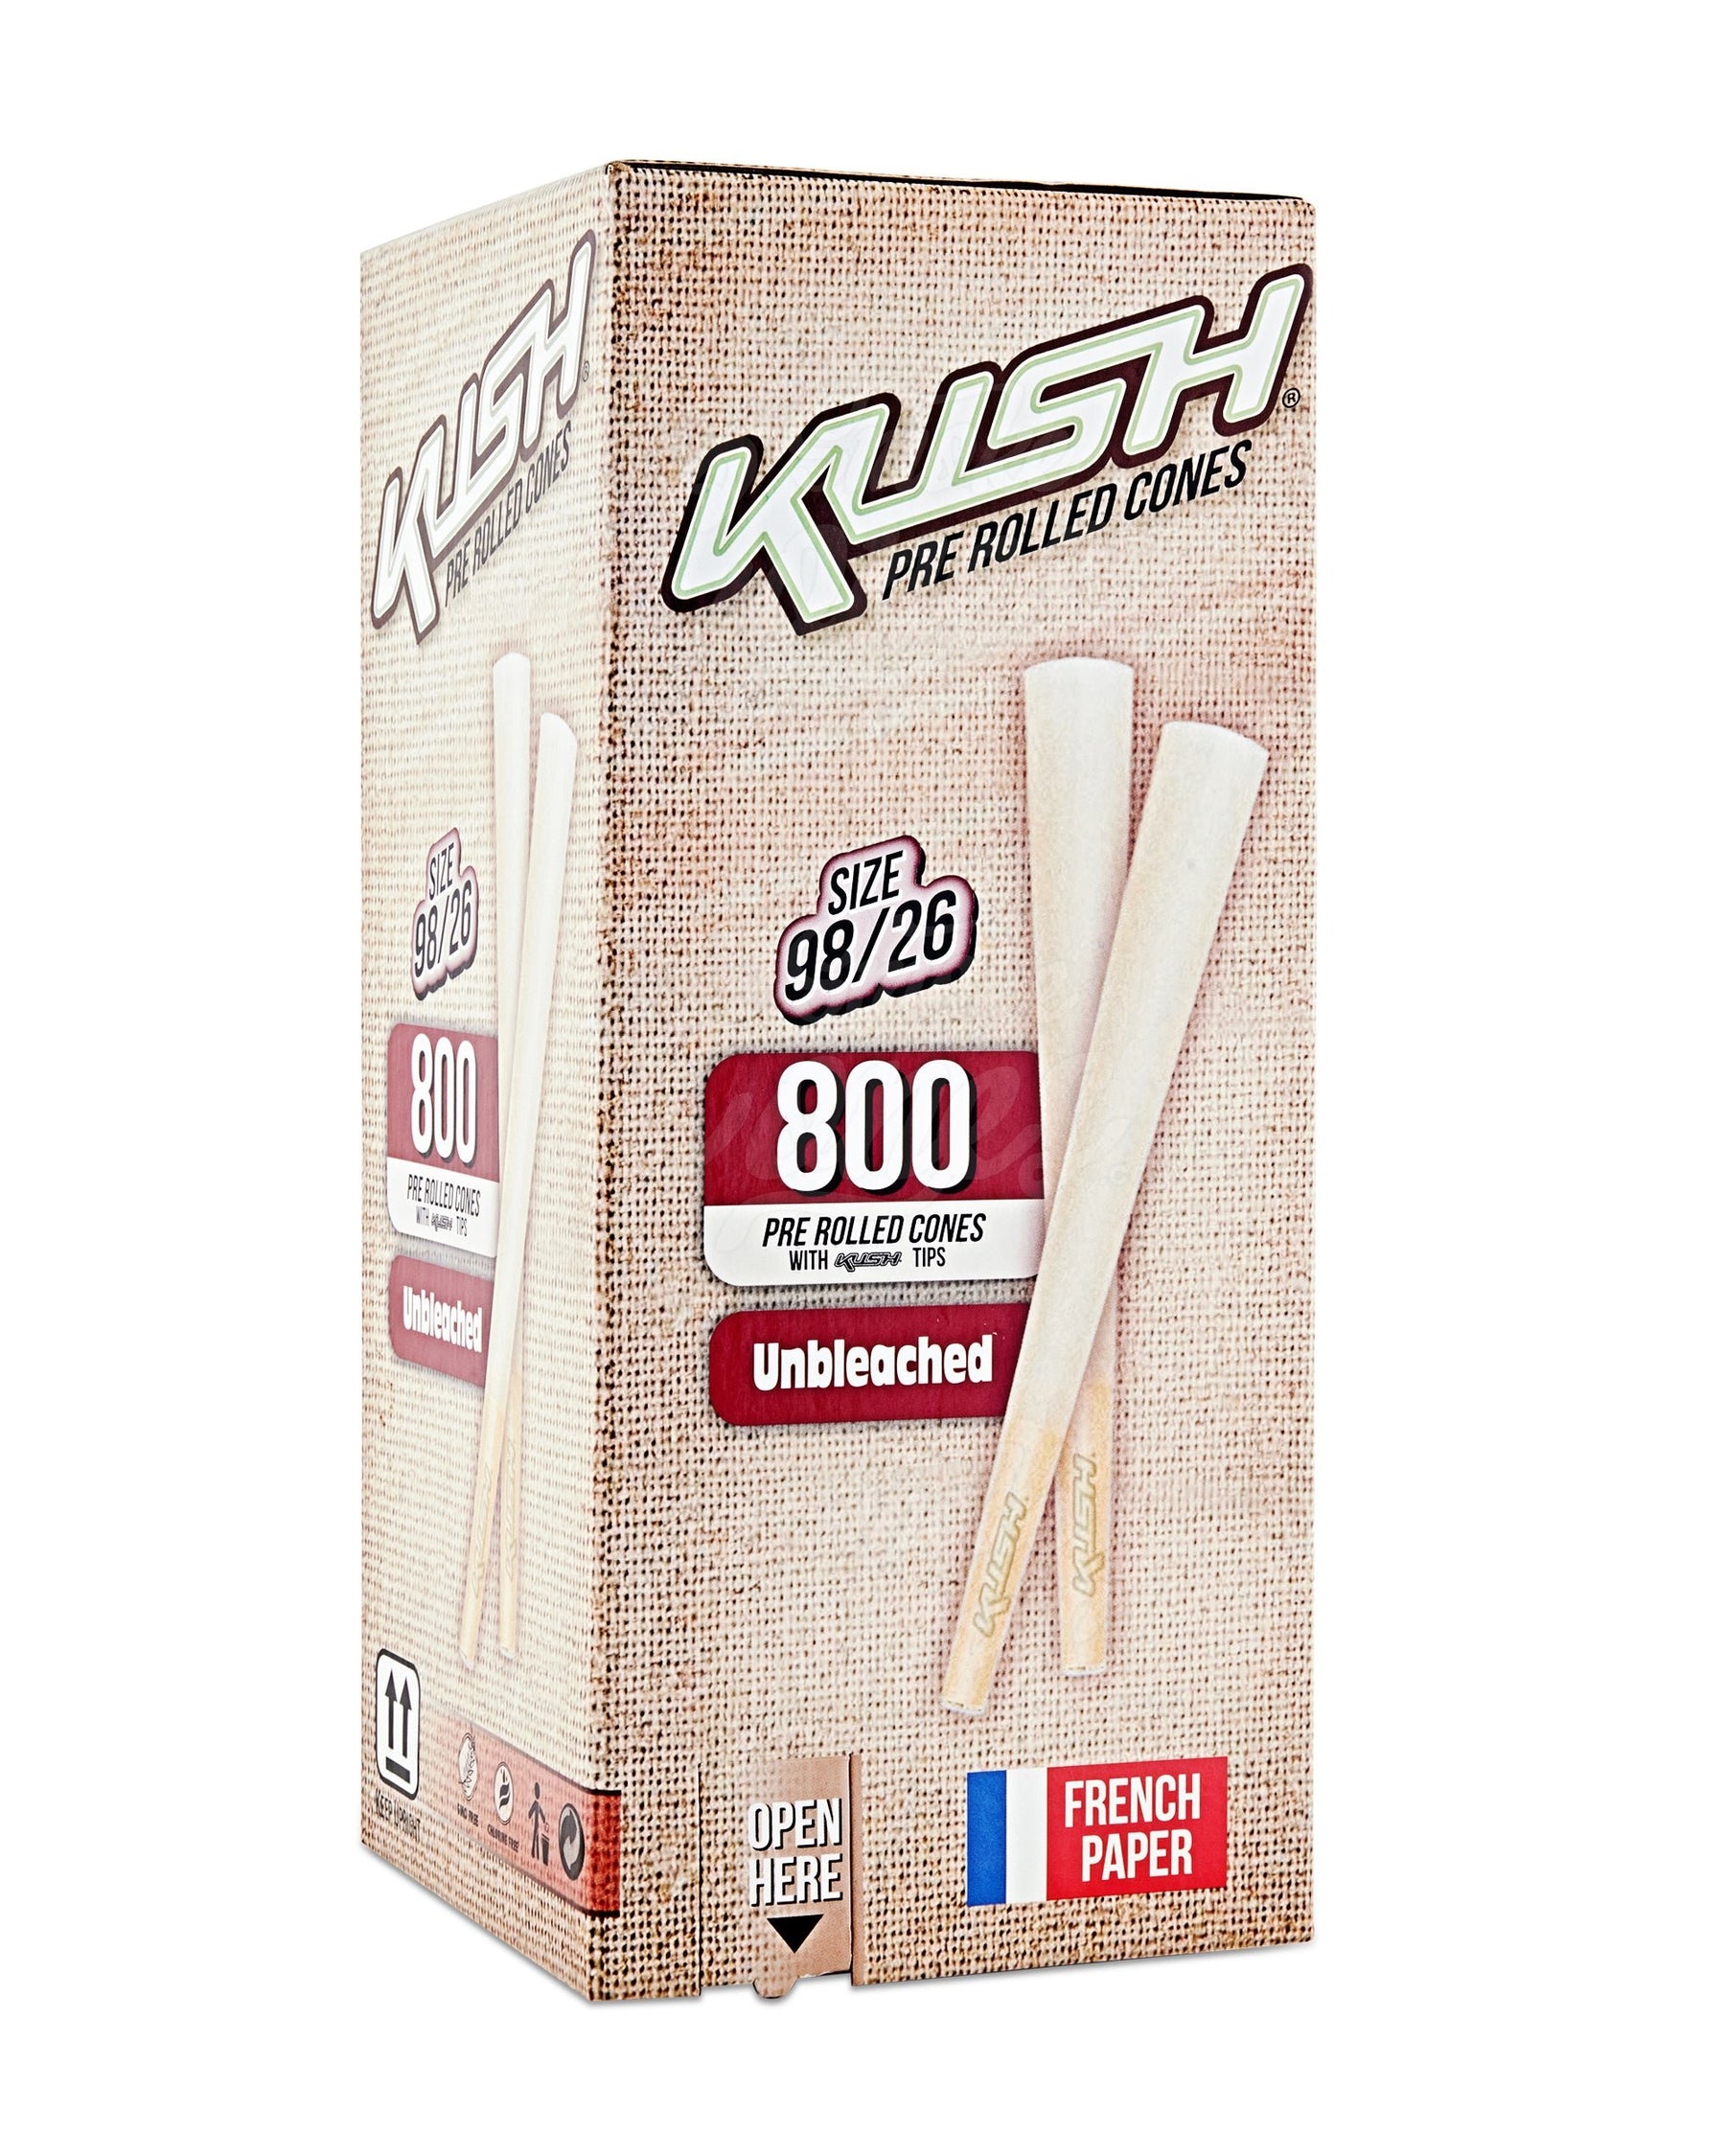 Kush 98mm 98 Special Size Unbleached Pre Rolled Cones w/ Filter Tip 800/Box - 1